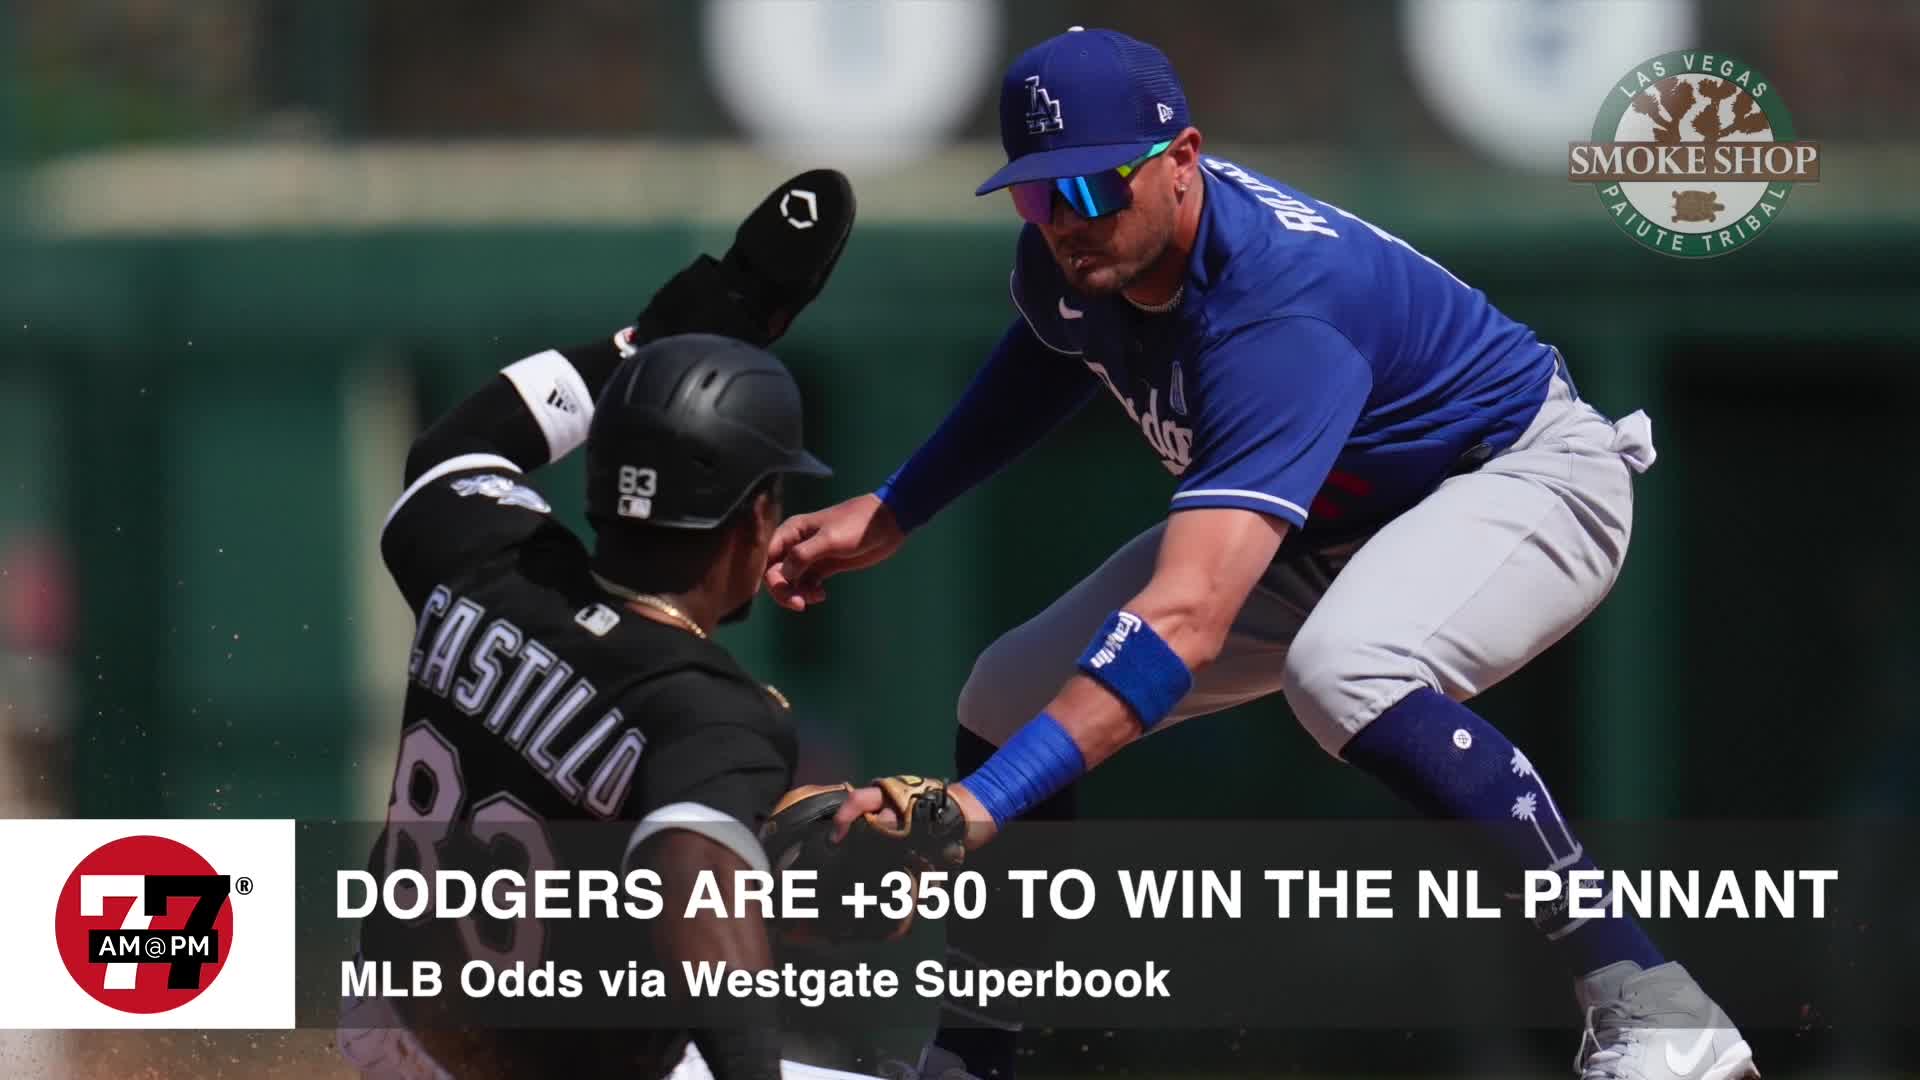 Dodgers are plus 350 to win the NL pennant